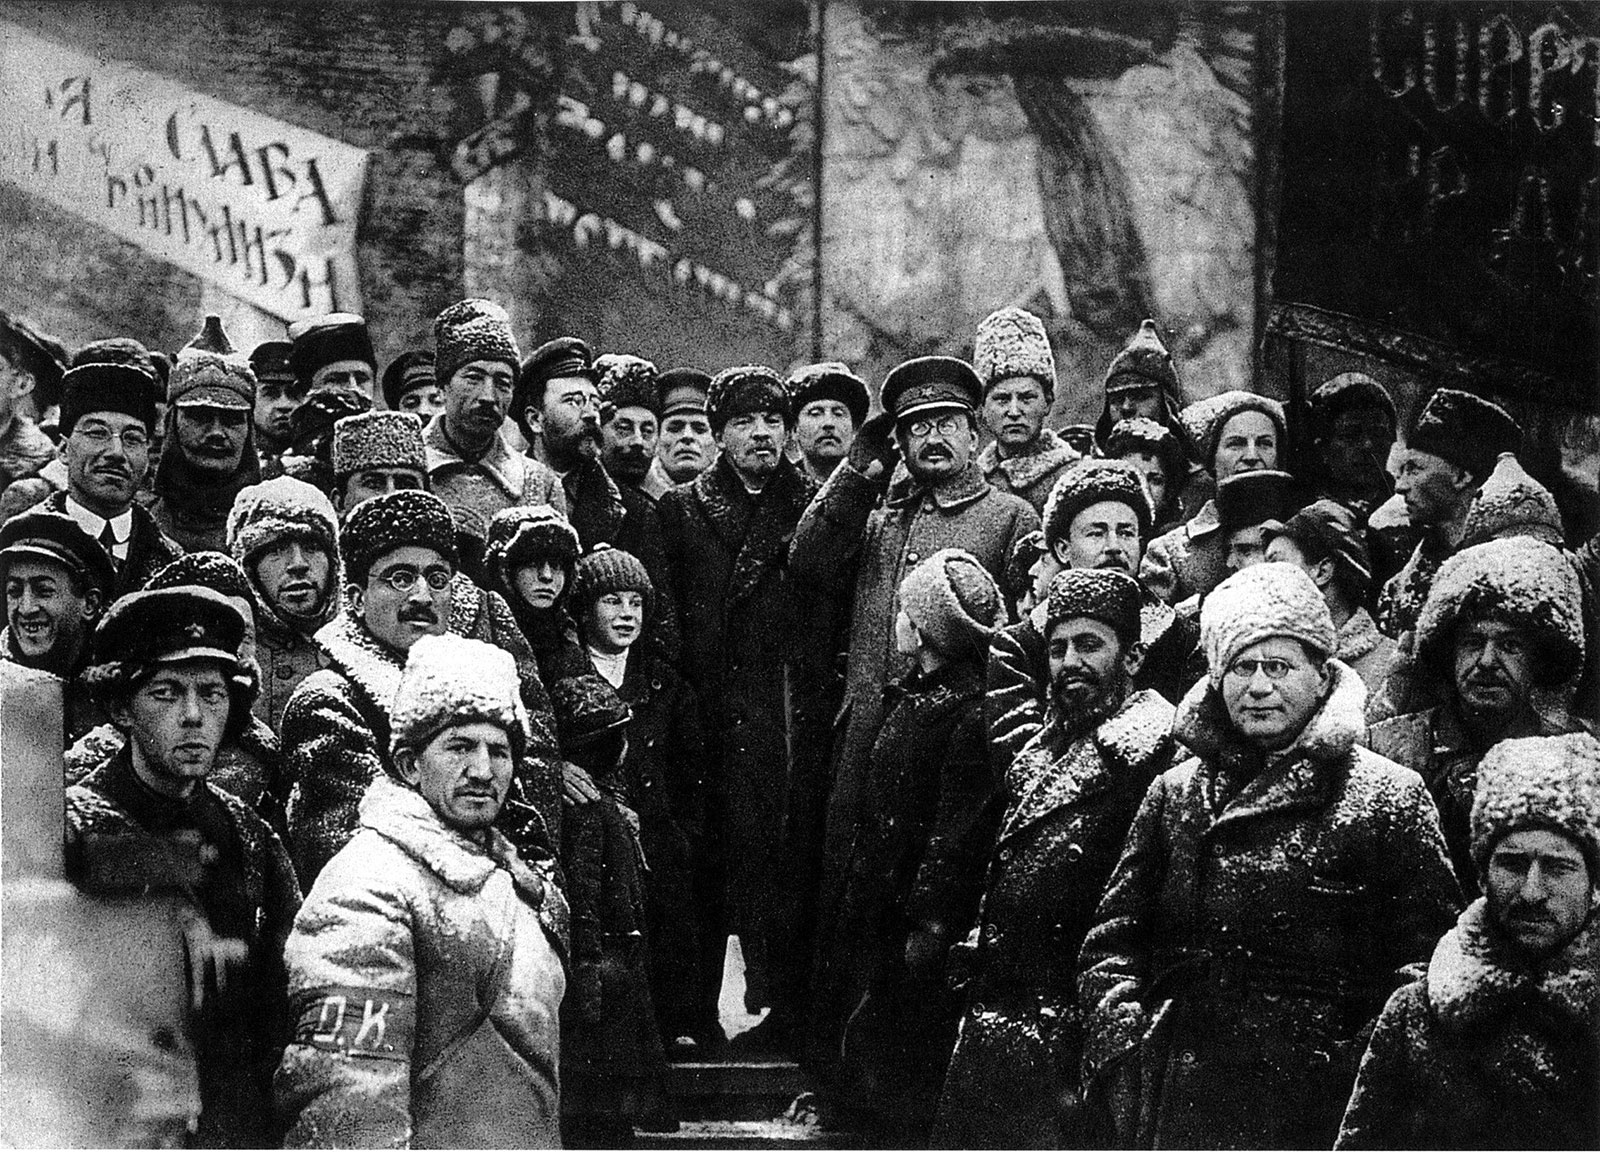 Vladimir Lenin and other Soviet leaders celebrating the second anniversary of the October Revolution in Red Square, Moscow, 1919